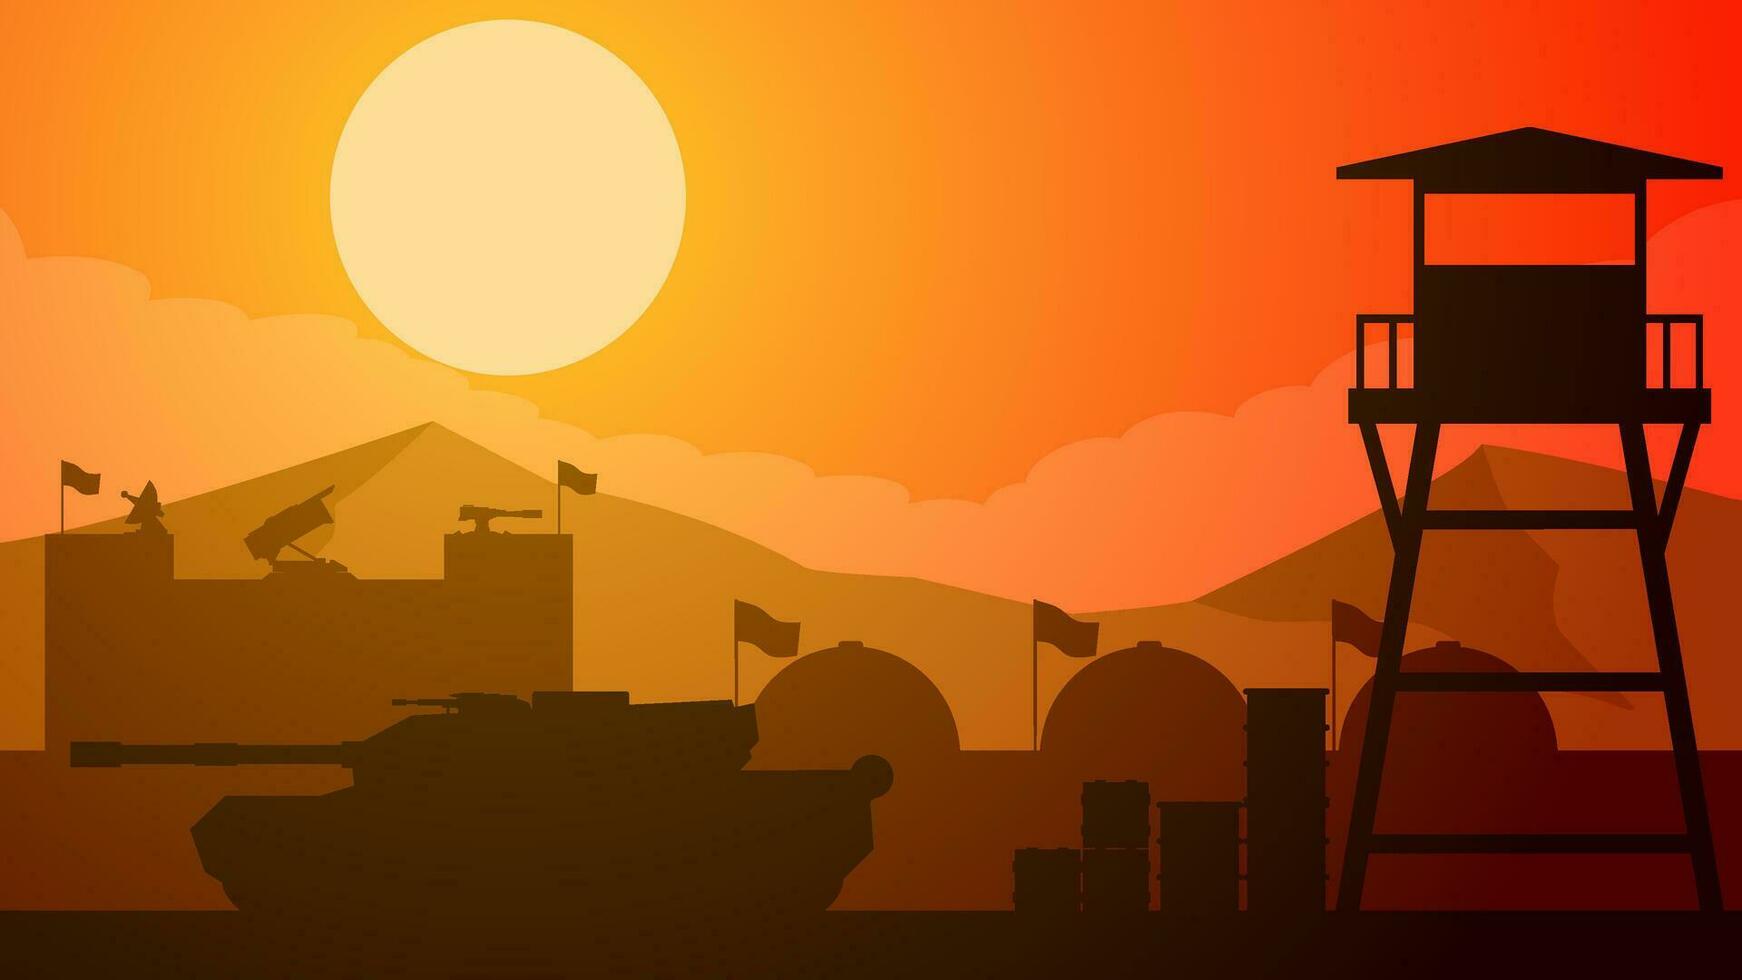 Military base landscape vector illustration. Silhouette of at military base with tank and watchtower. Military landscape for background, wallpaper or illustration. Barrack army and turret gun